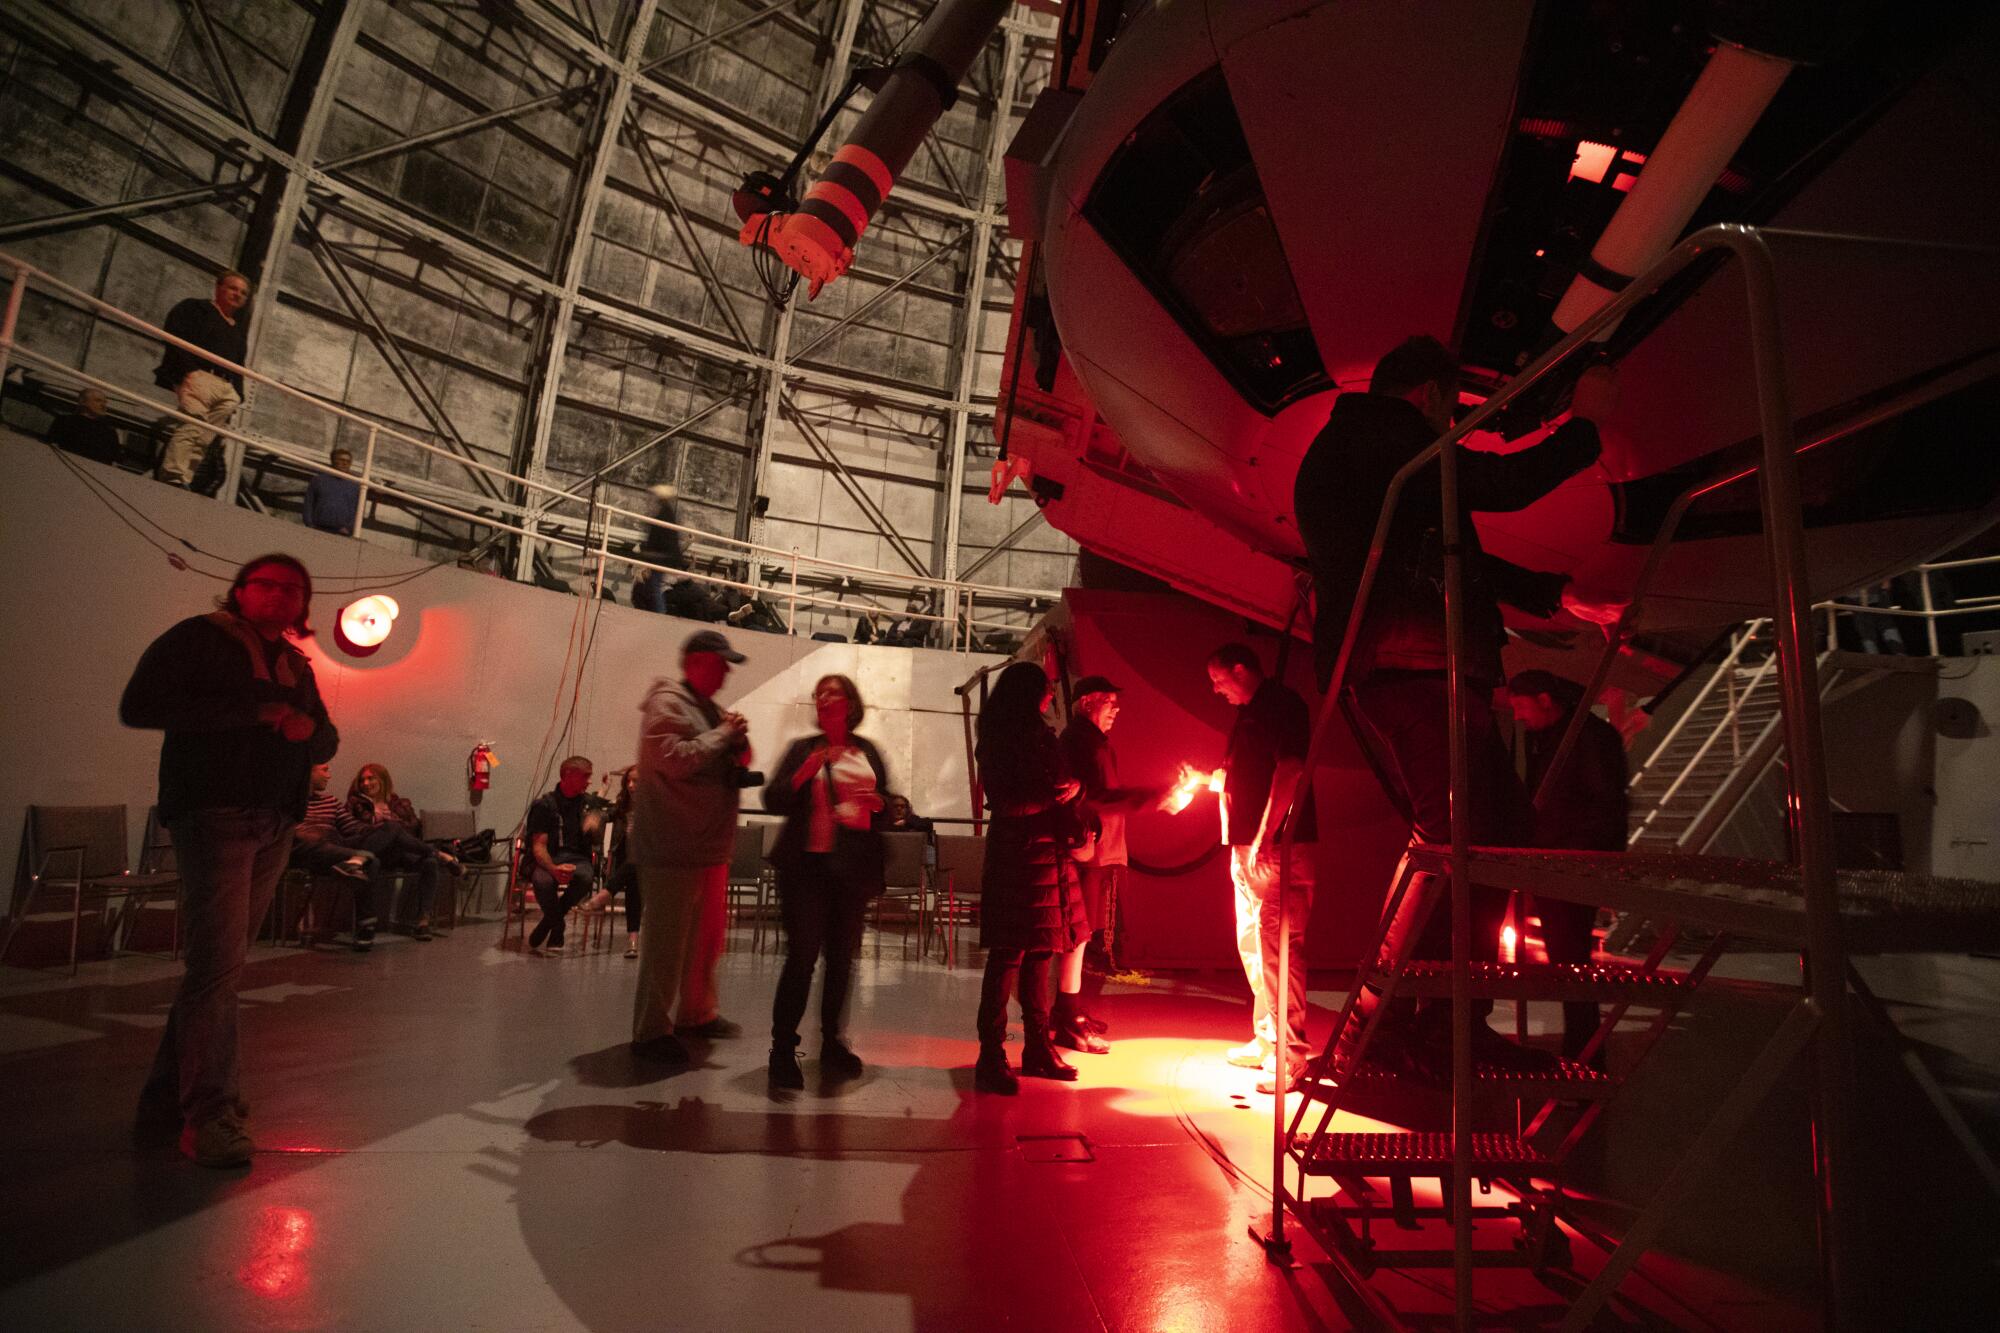 Guests line up to view stars though a telescope at Mt. Wilson Observatory.